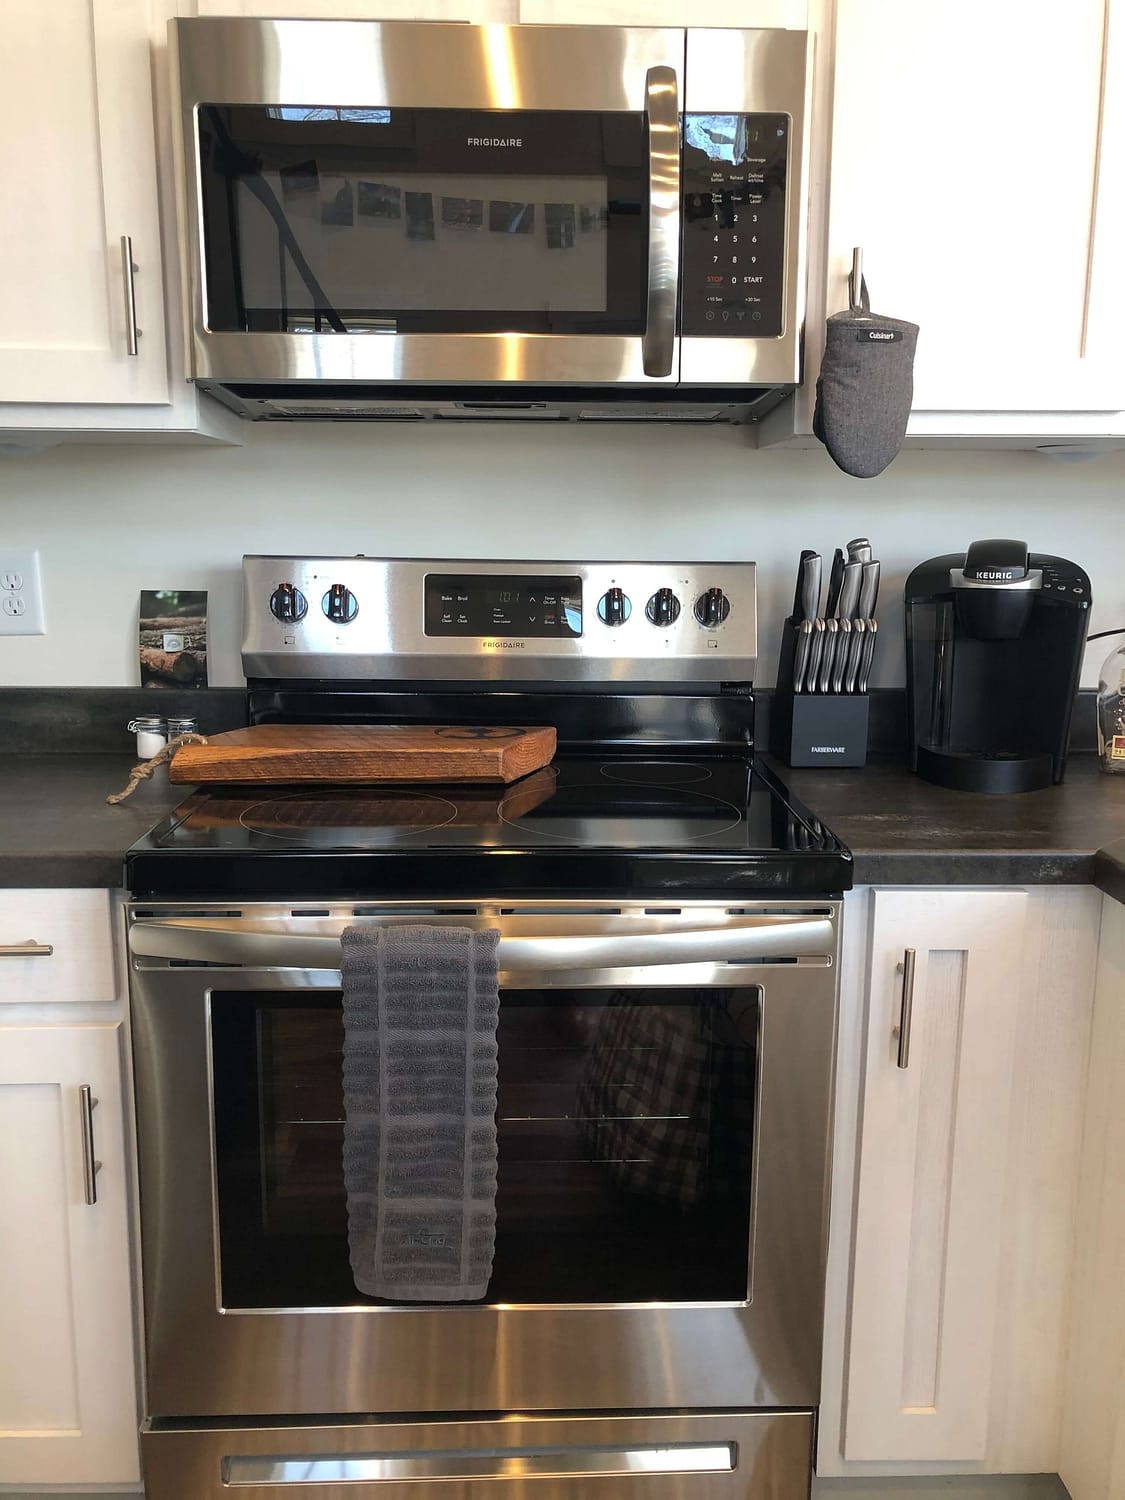 microwave oven and electric cooking range